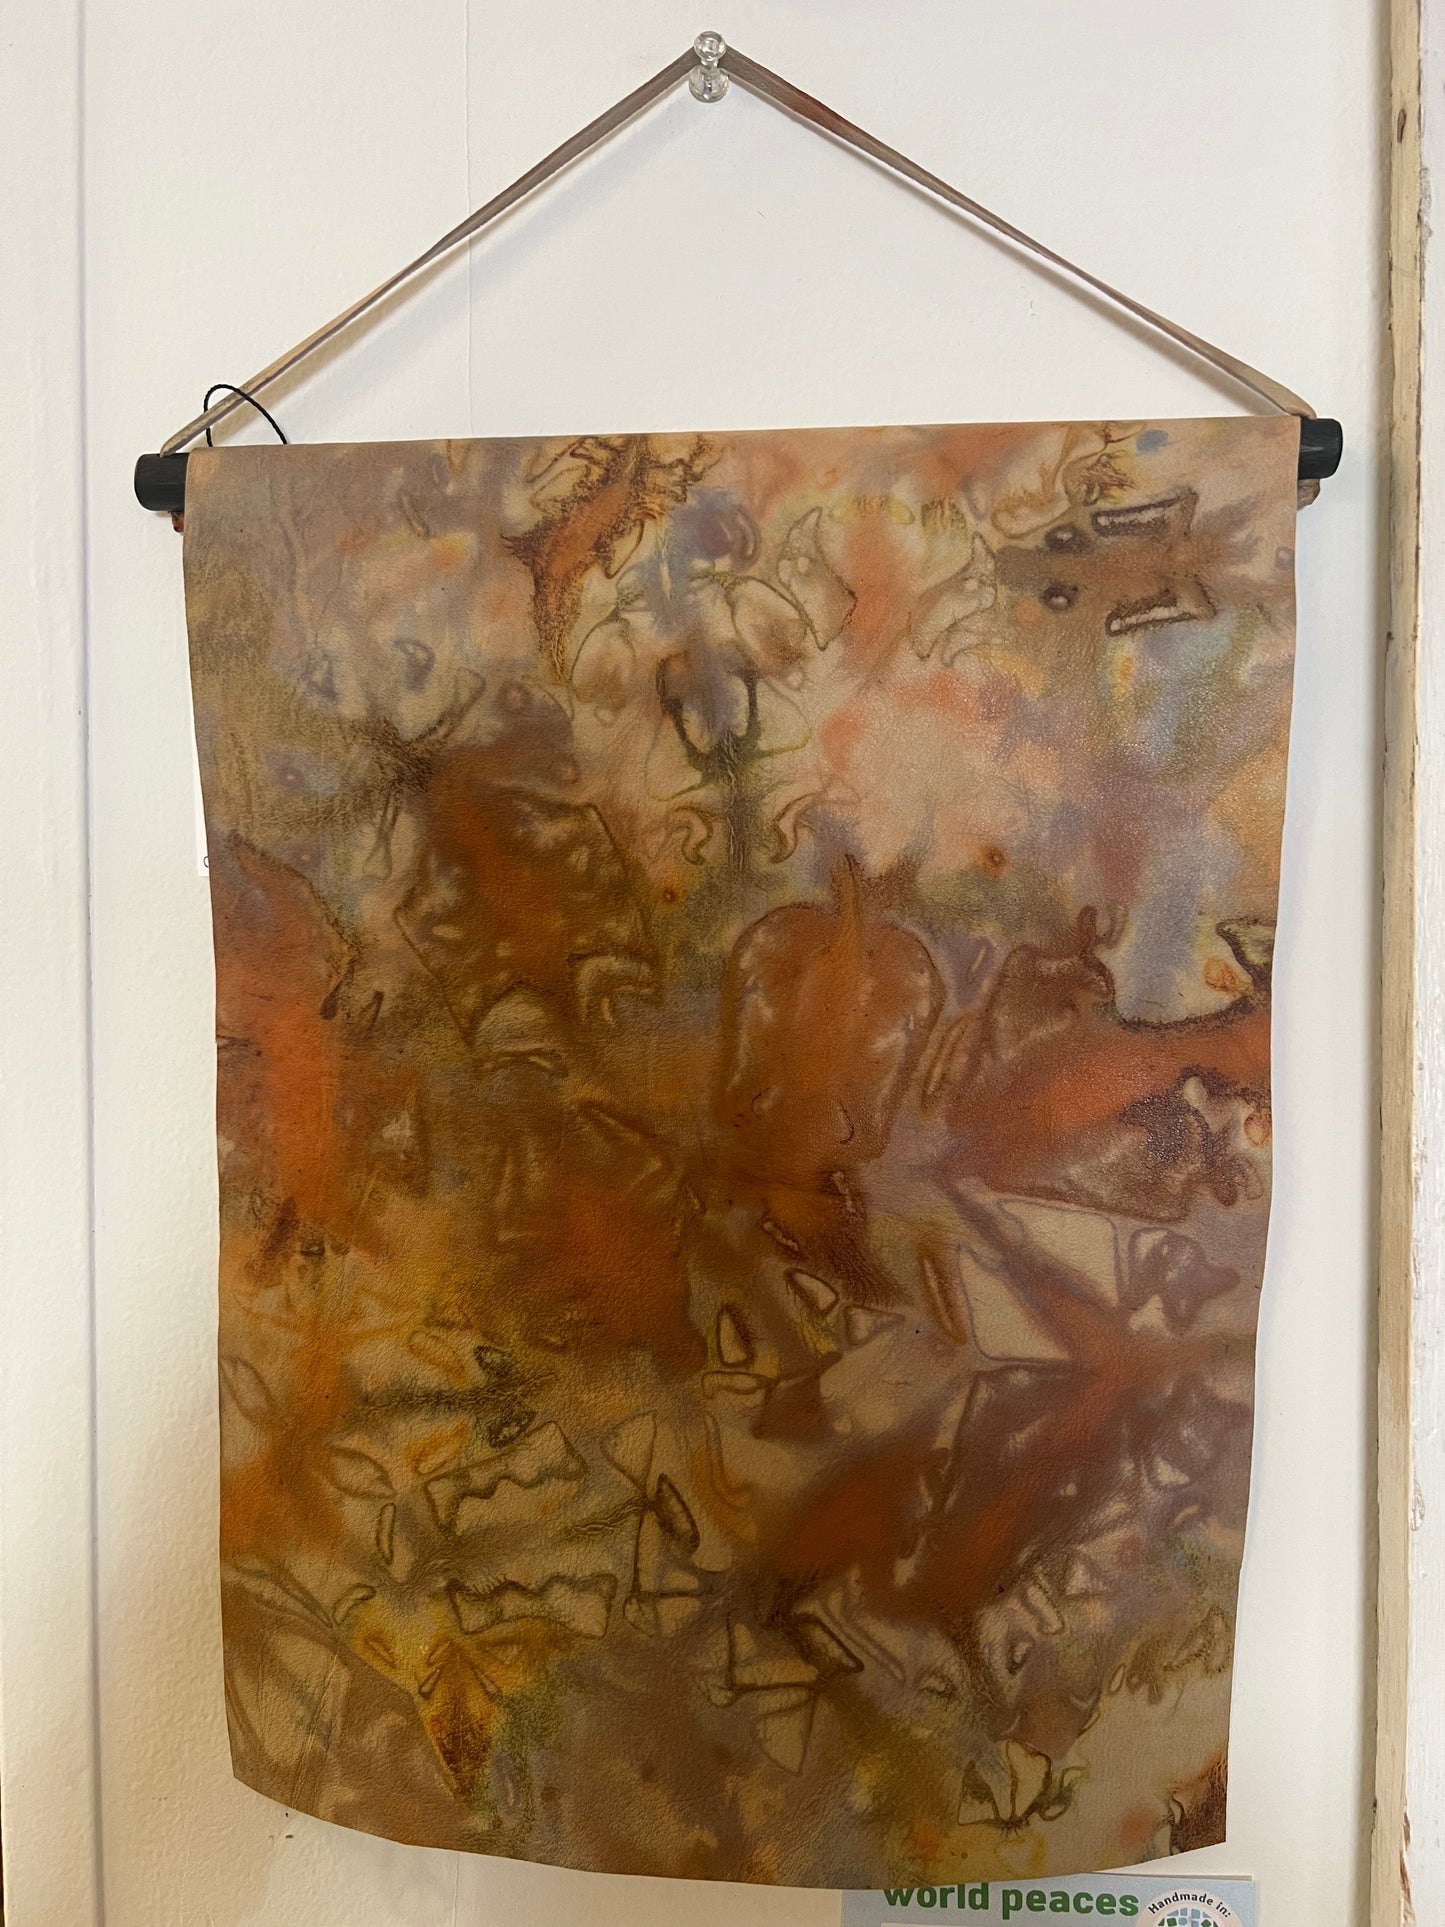 Hand dyed leather wall hanging